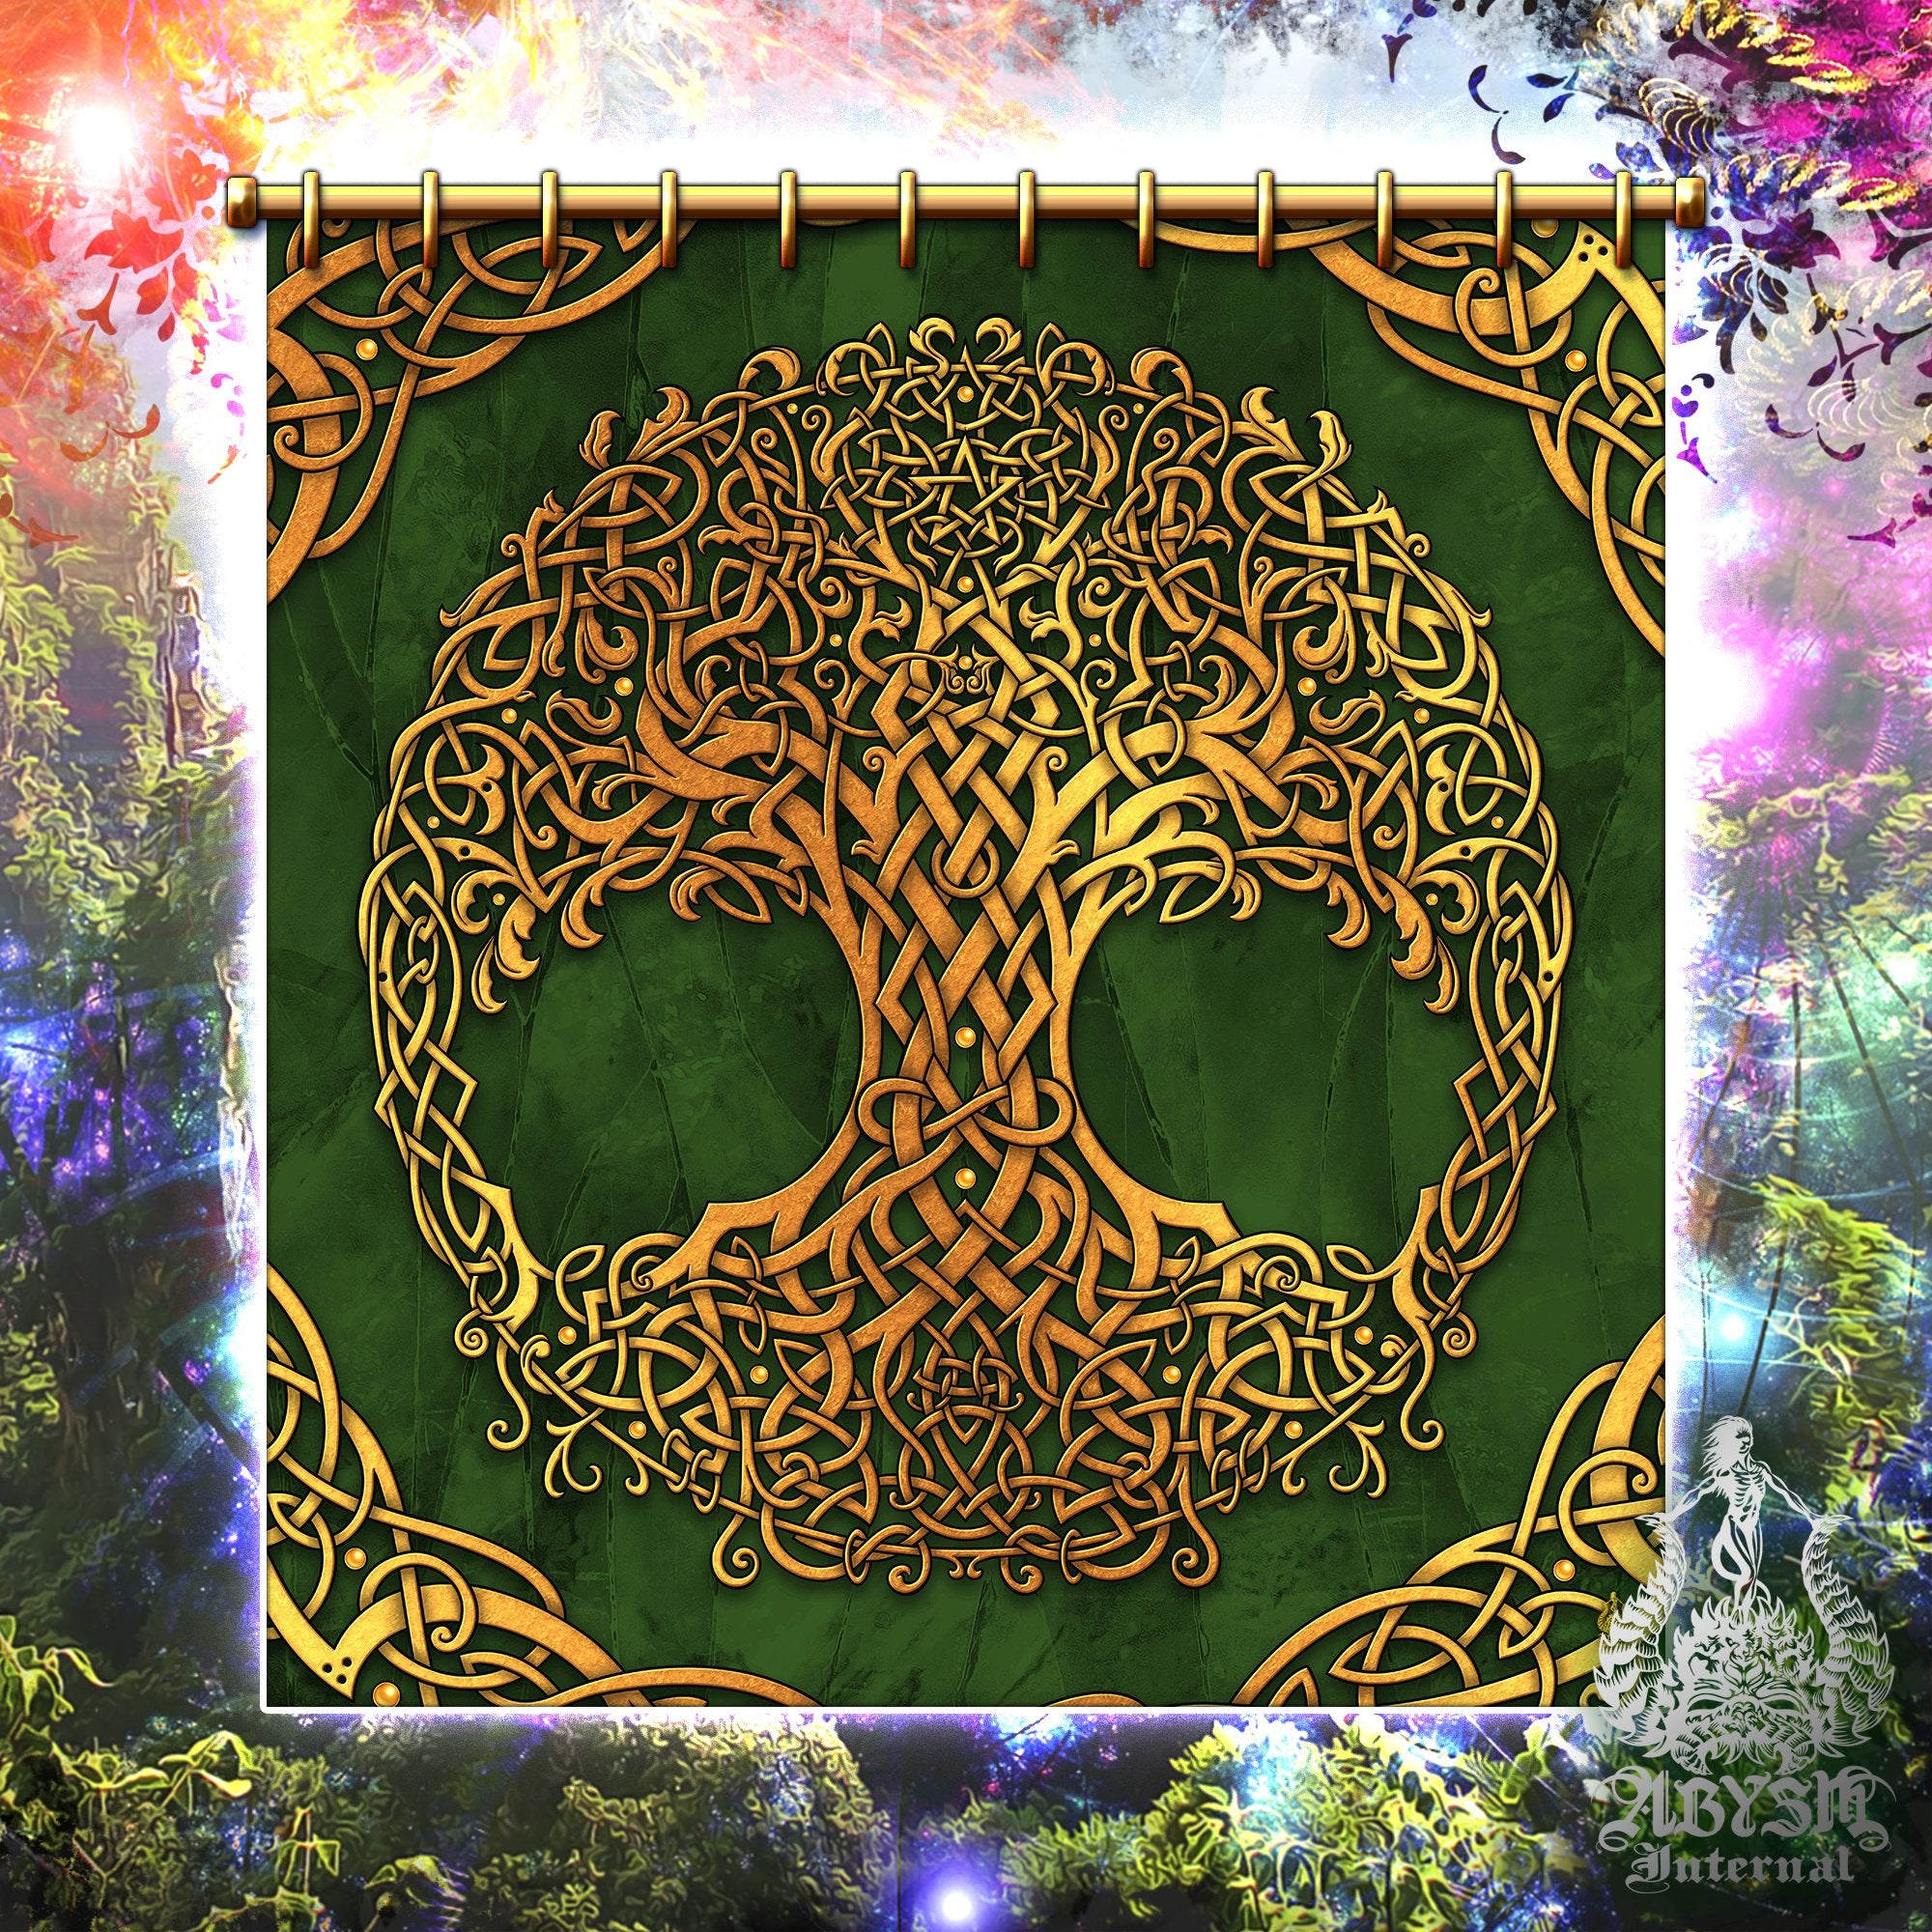 Pagan Shower Curtain, 71x74 inches, Hippie and Boho Bathroom Decor, Gold Tree of Life, Celtic Knot, Eclectic and Funky Home Art - 3 Colors - Abysm Internal